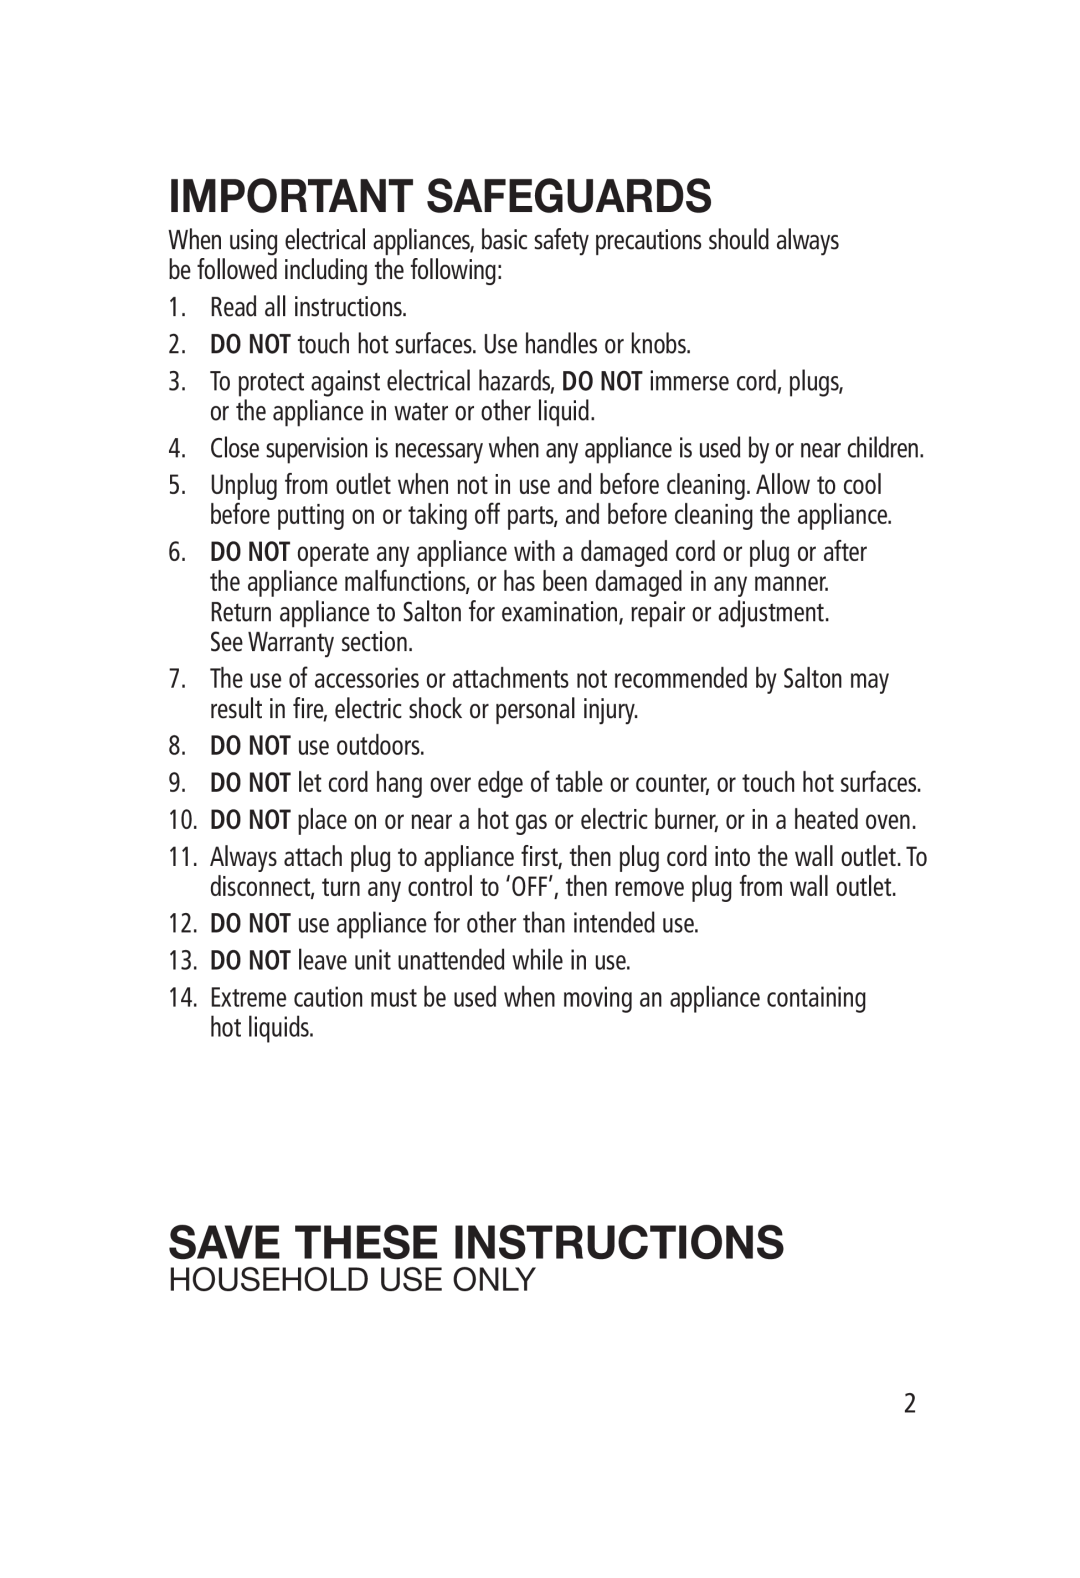 Salton GK-1202 manual Household Use Only, Important Safeguards, Save These Instructions 